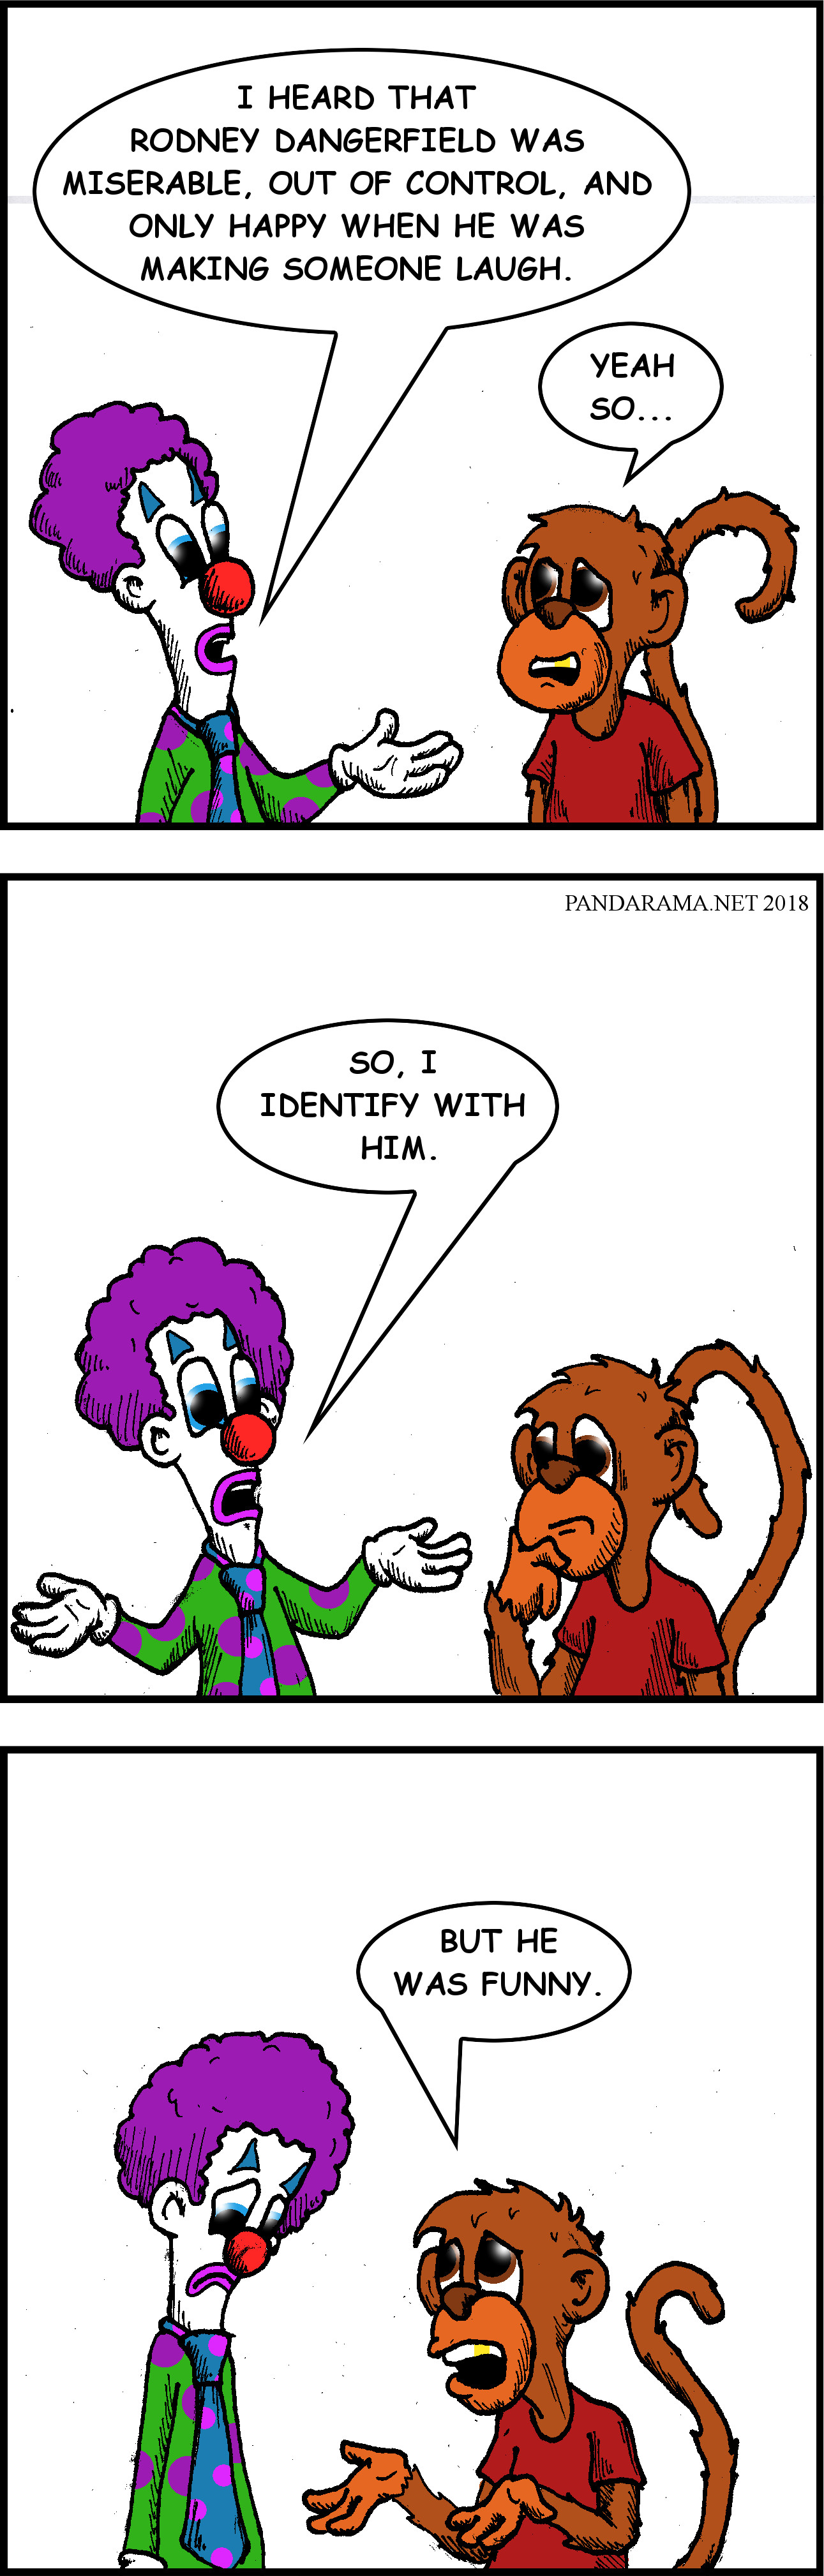 clown explains to a monkey that he identifies with rodney dangerfield, because he is miserable, out of control, and only happy when making others laugh. Monkey asserts the difference is that rodney dangerfield was funny. jack roy. comedian. webcomic.  cartoon, cartoons, comic, comics